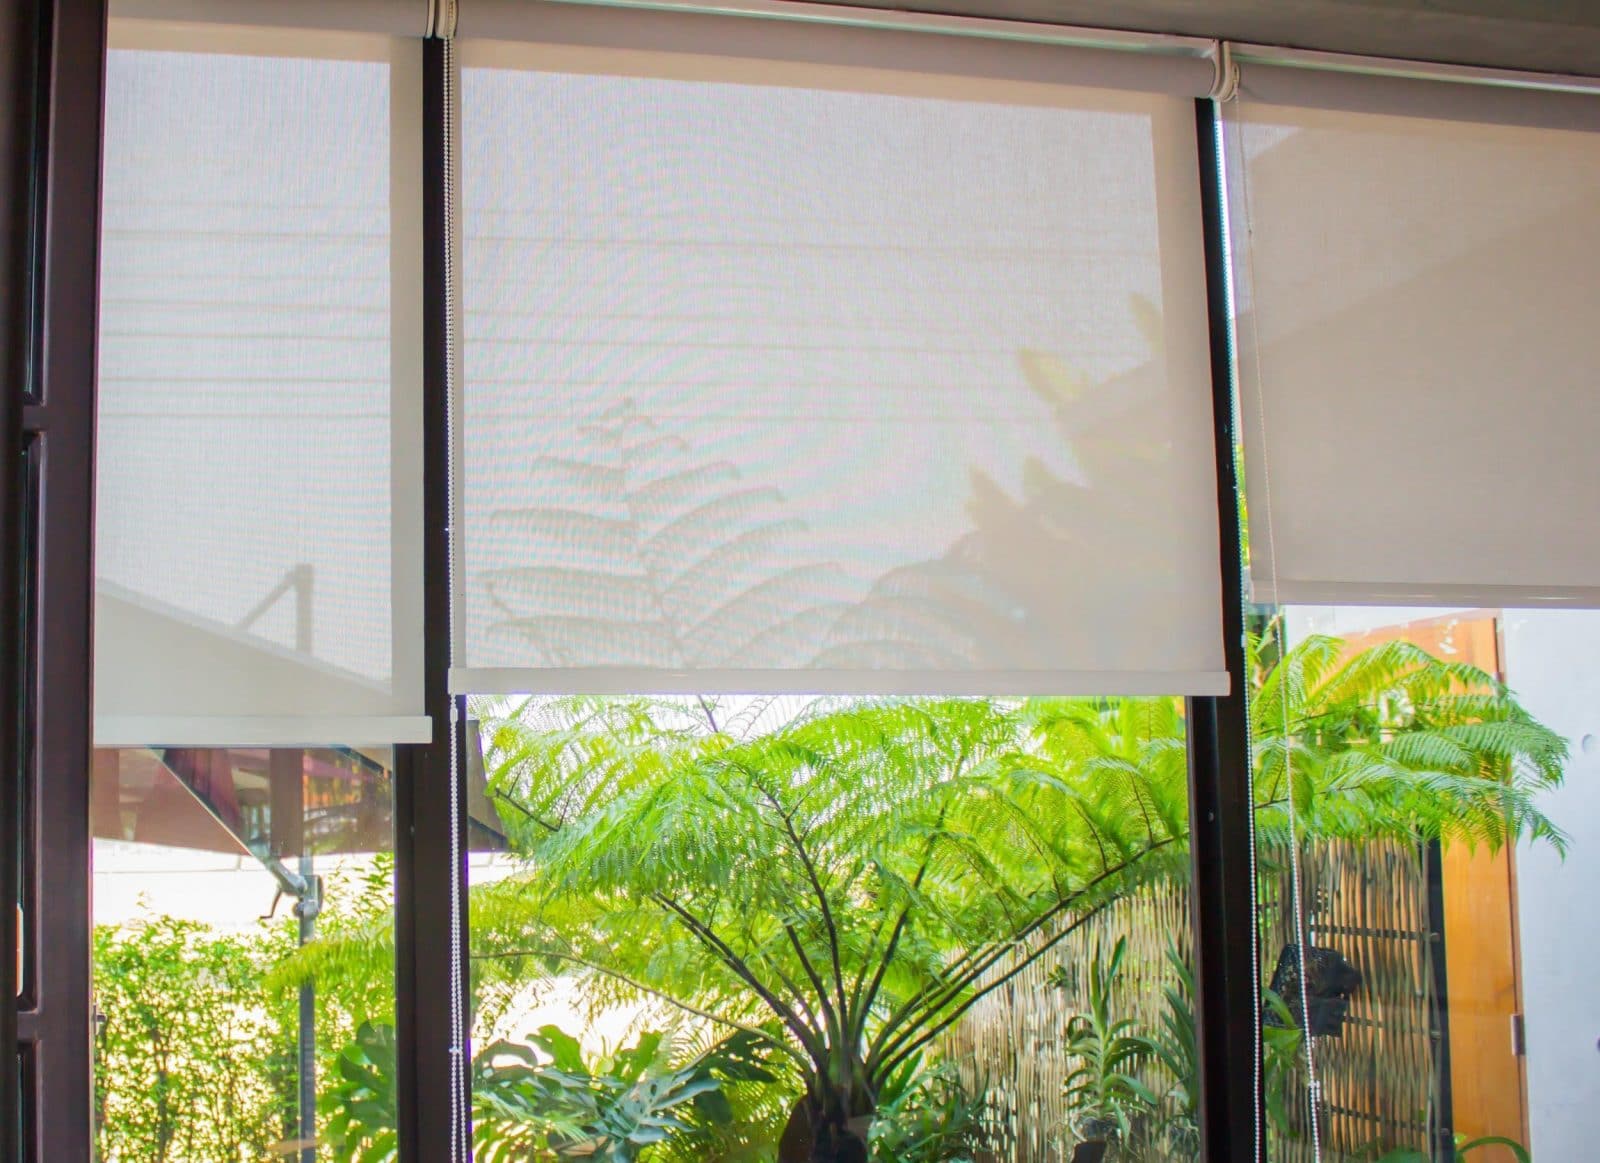 Outdoor blinds for the balcony or patio area